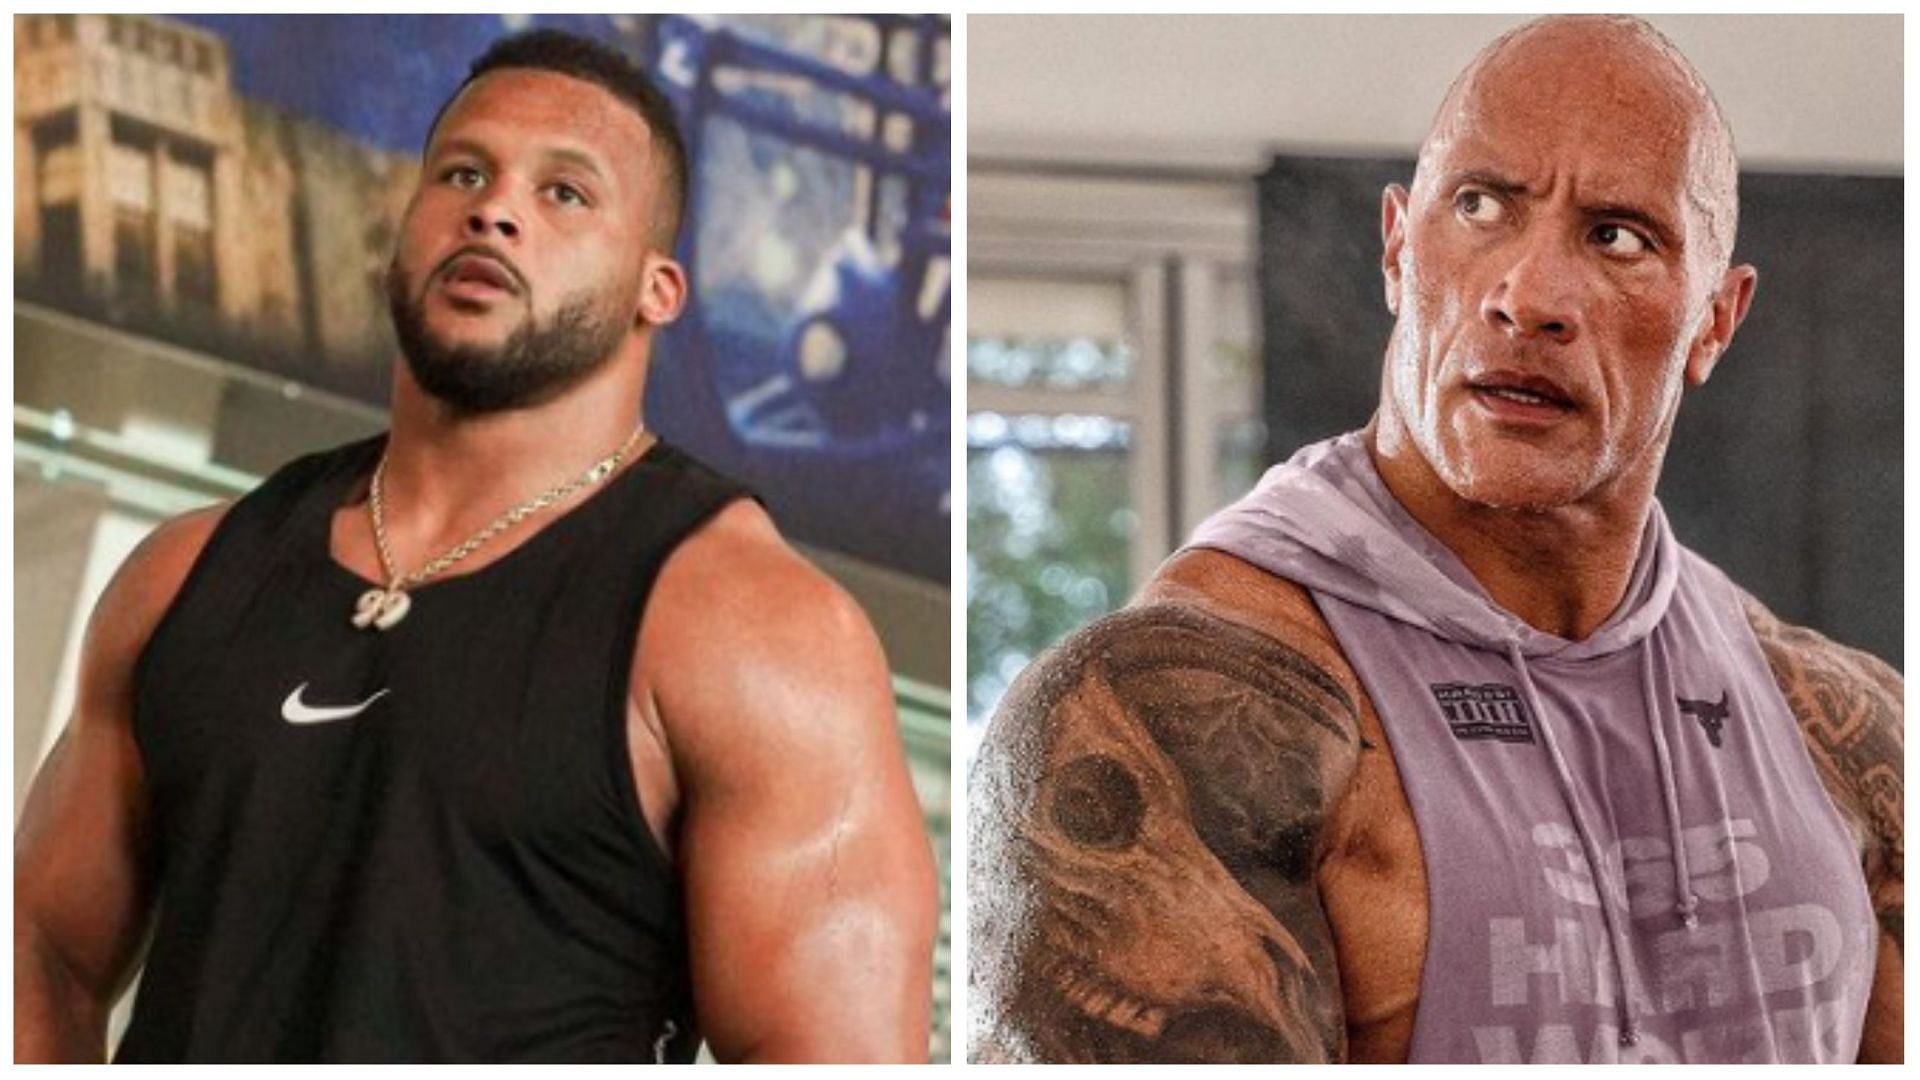 Dwayne Johnson has regimen of workouts that he follows each day, which includes lifting weights and other exercises. (Image via IG @therock / @AaronDonald99 )